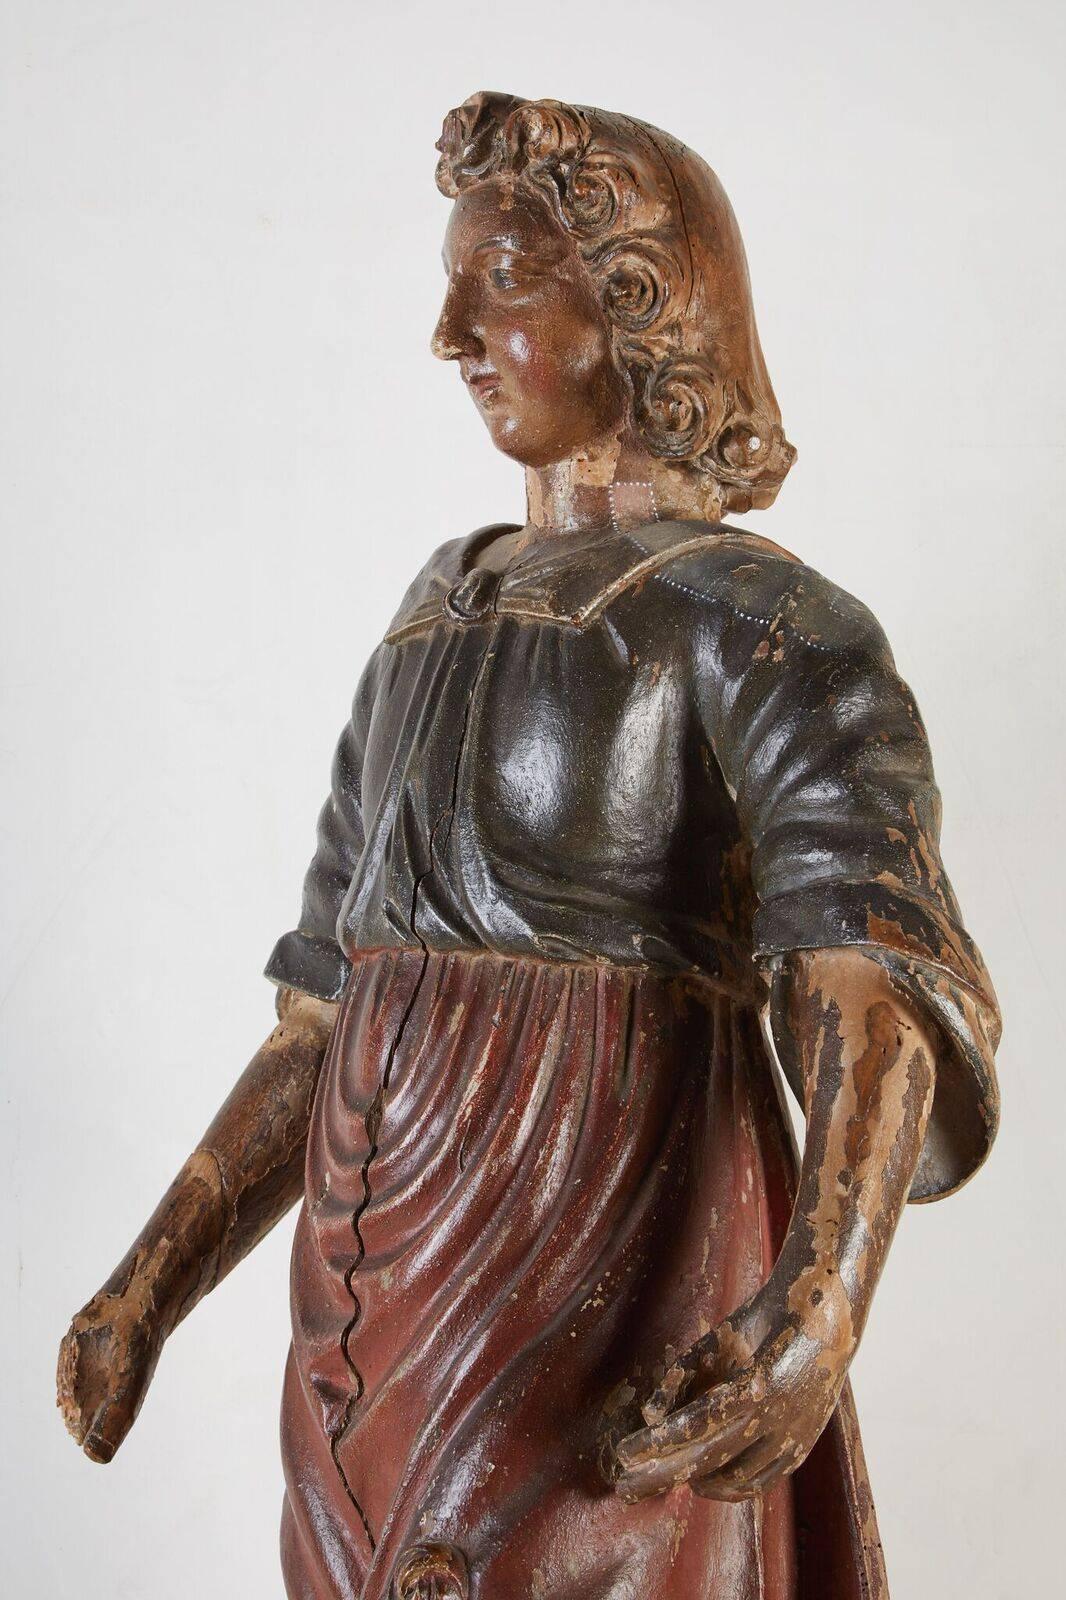 Large, 18th Century, Painted Santos Figure - Brown Figurative Sculpture by Unknown